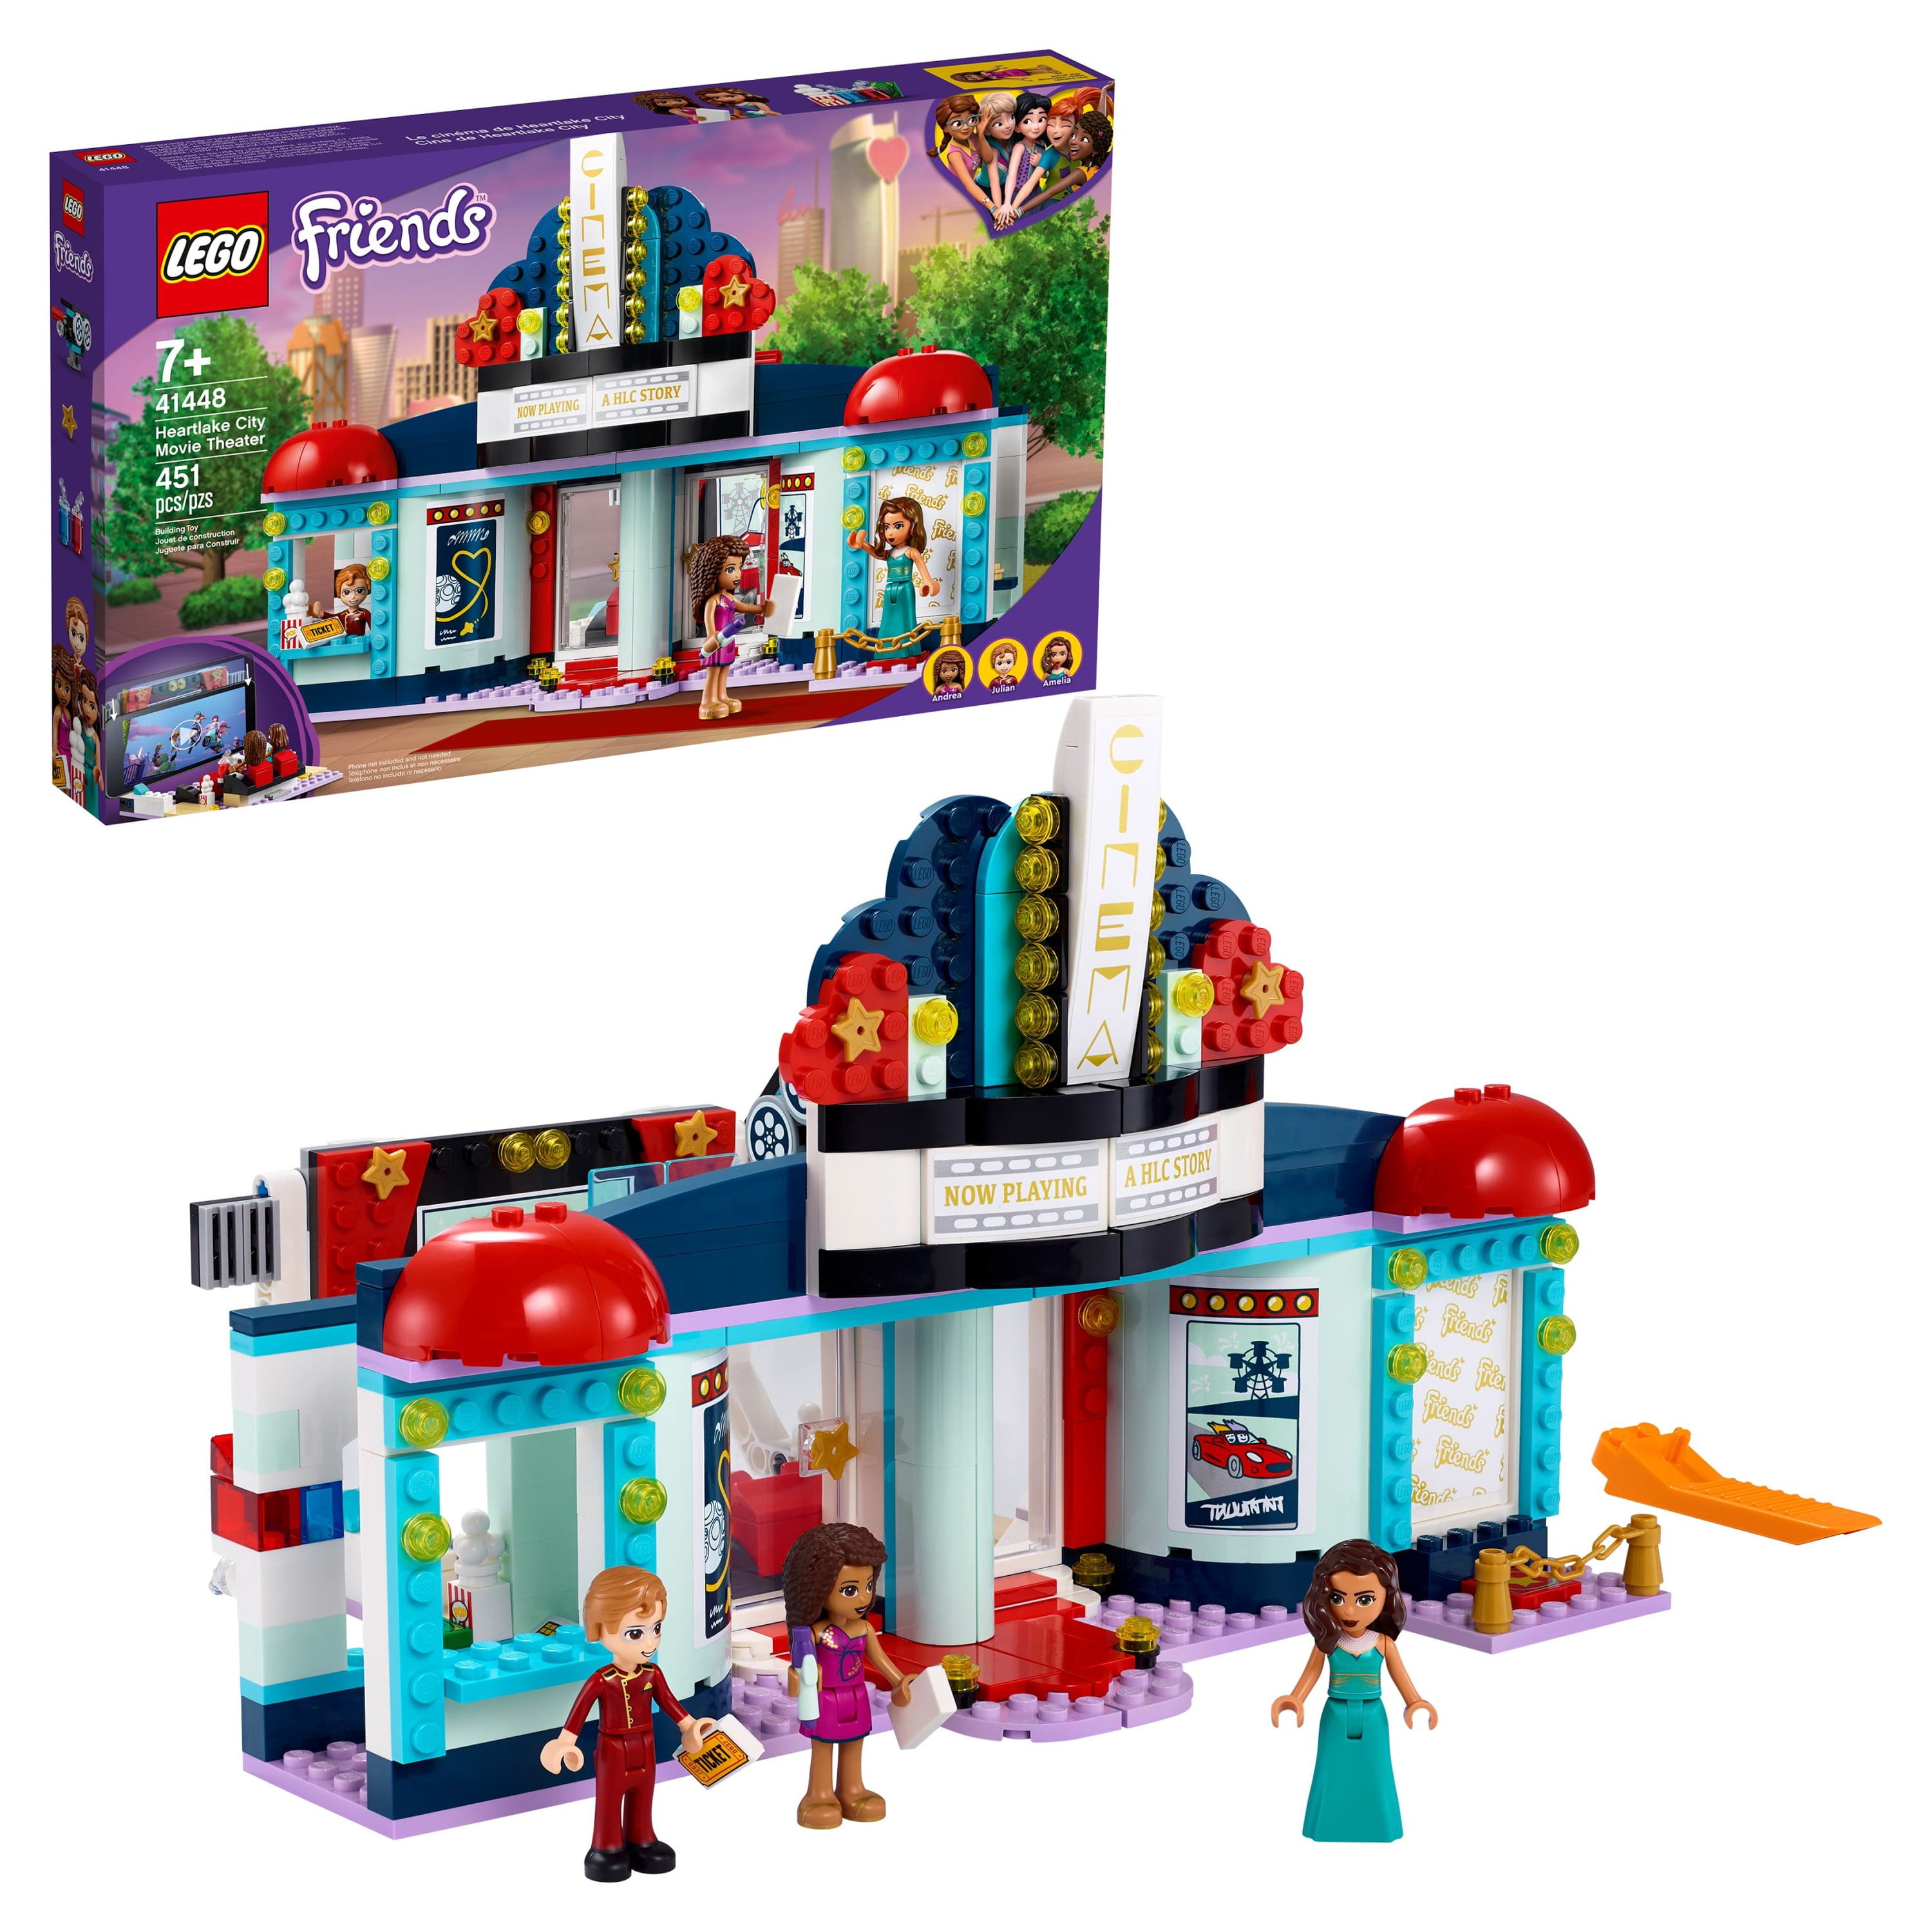 Lego Sets For Teens That Make The Best Gifts